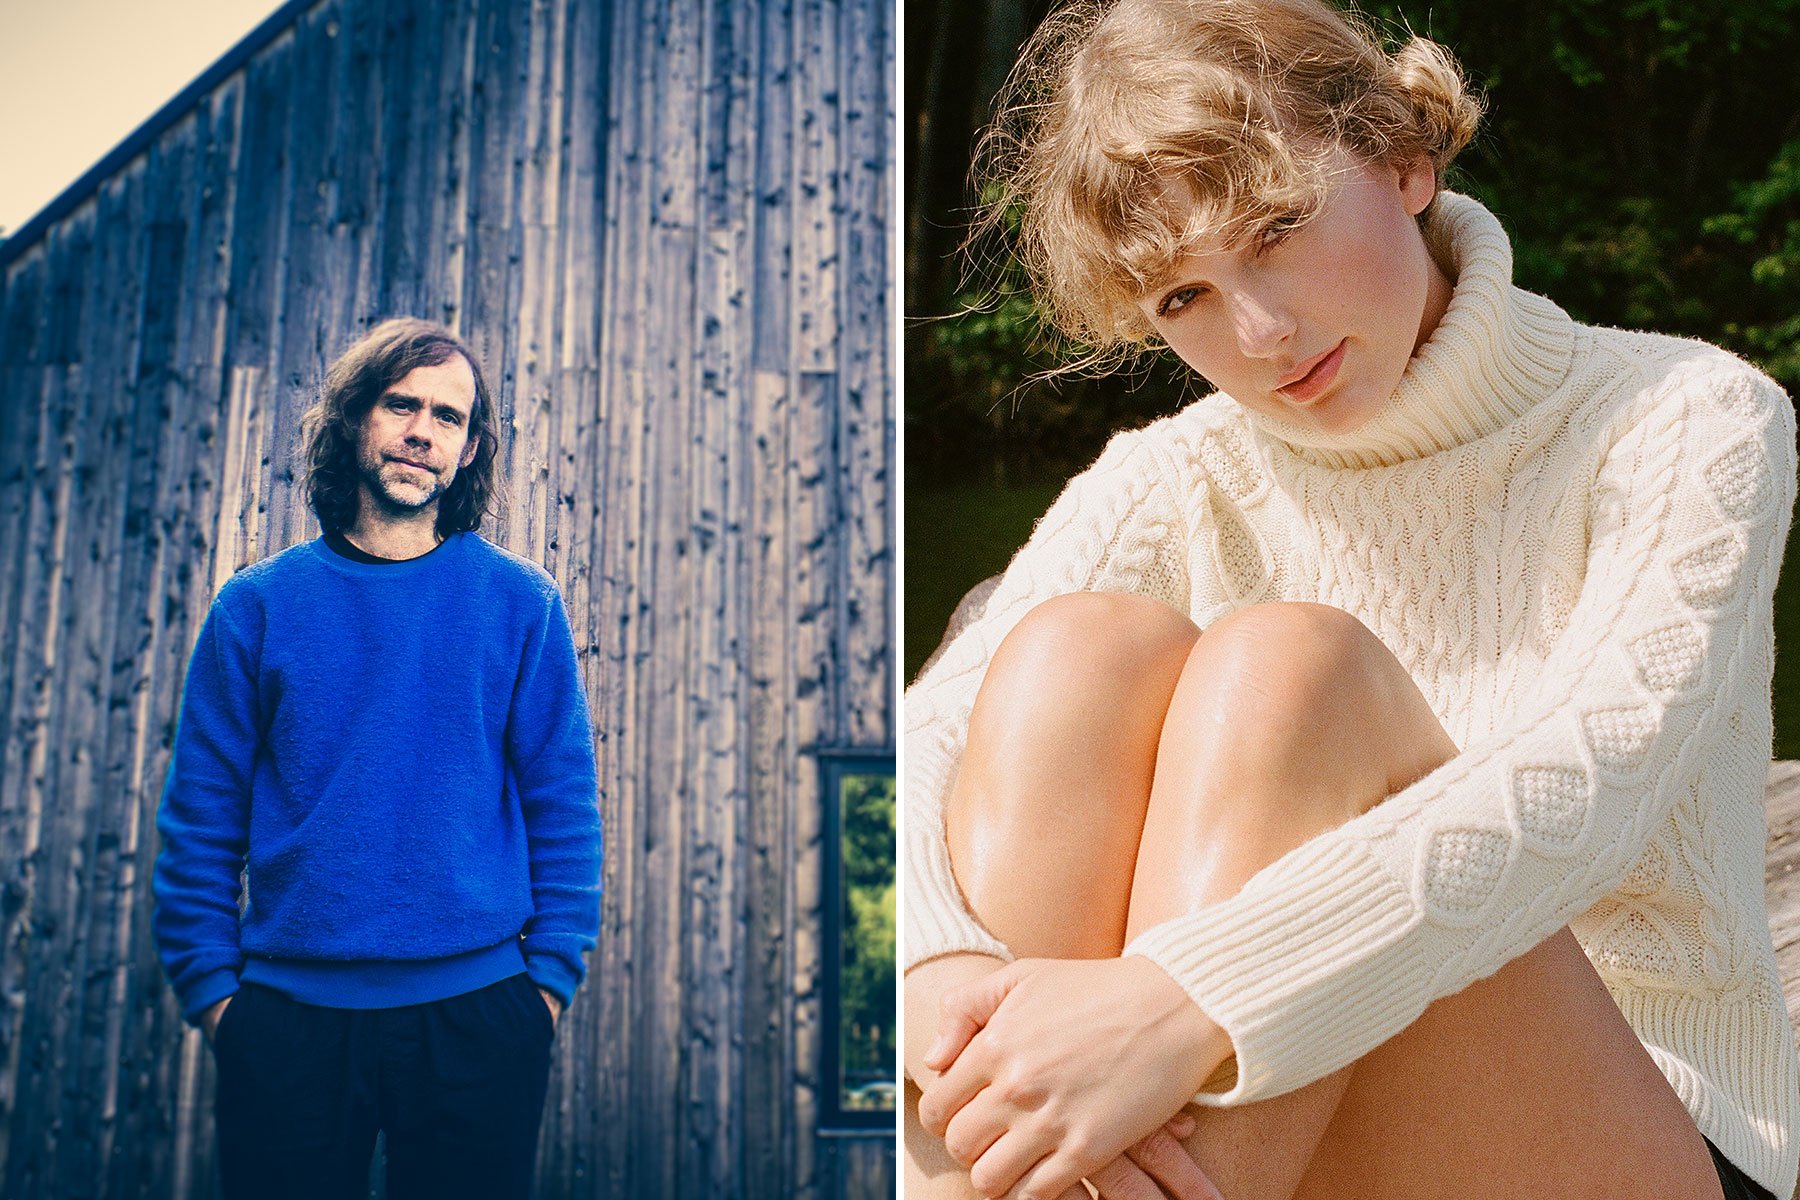 How Aaron Dessner and Taylor Swift Stripped Down Her Sound on 'Folklore'